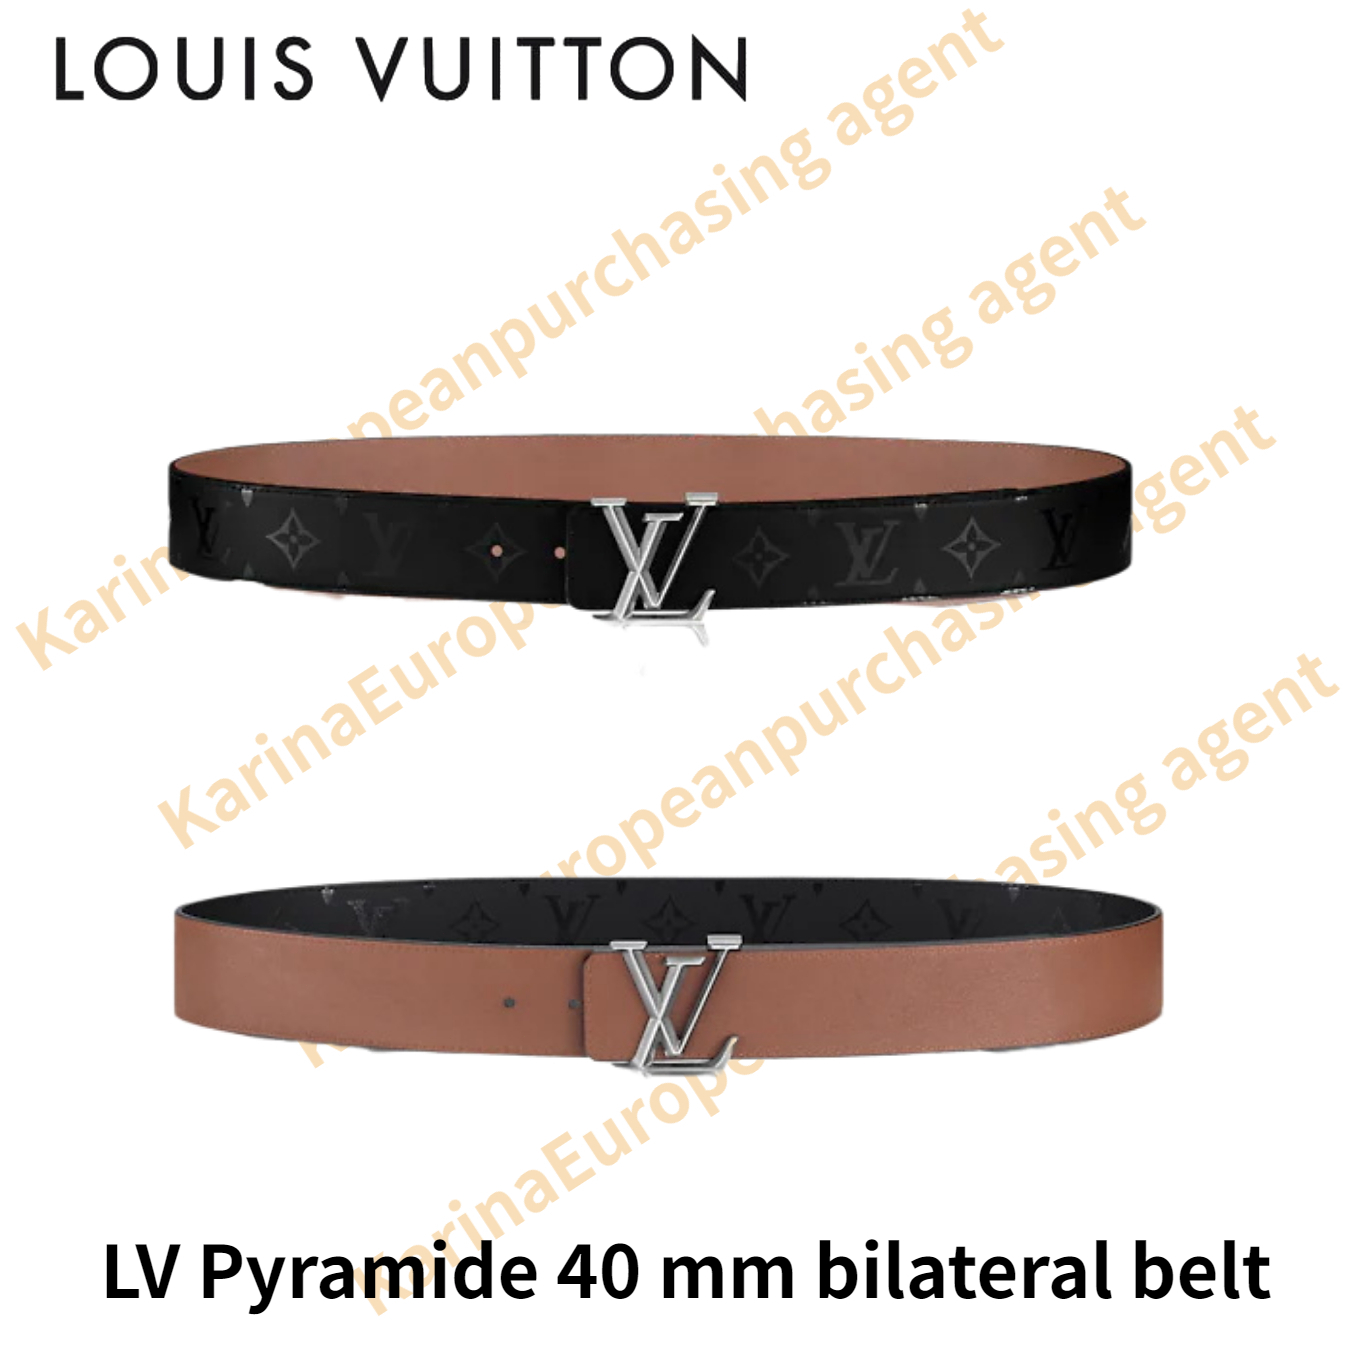 LV Pyramide 40 mm bilateral belt Louis Vuitton Classic models Made in France